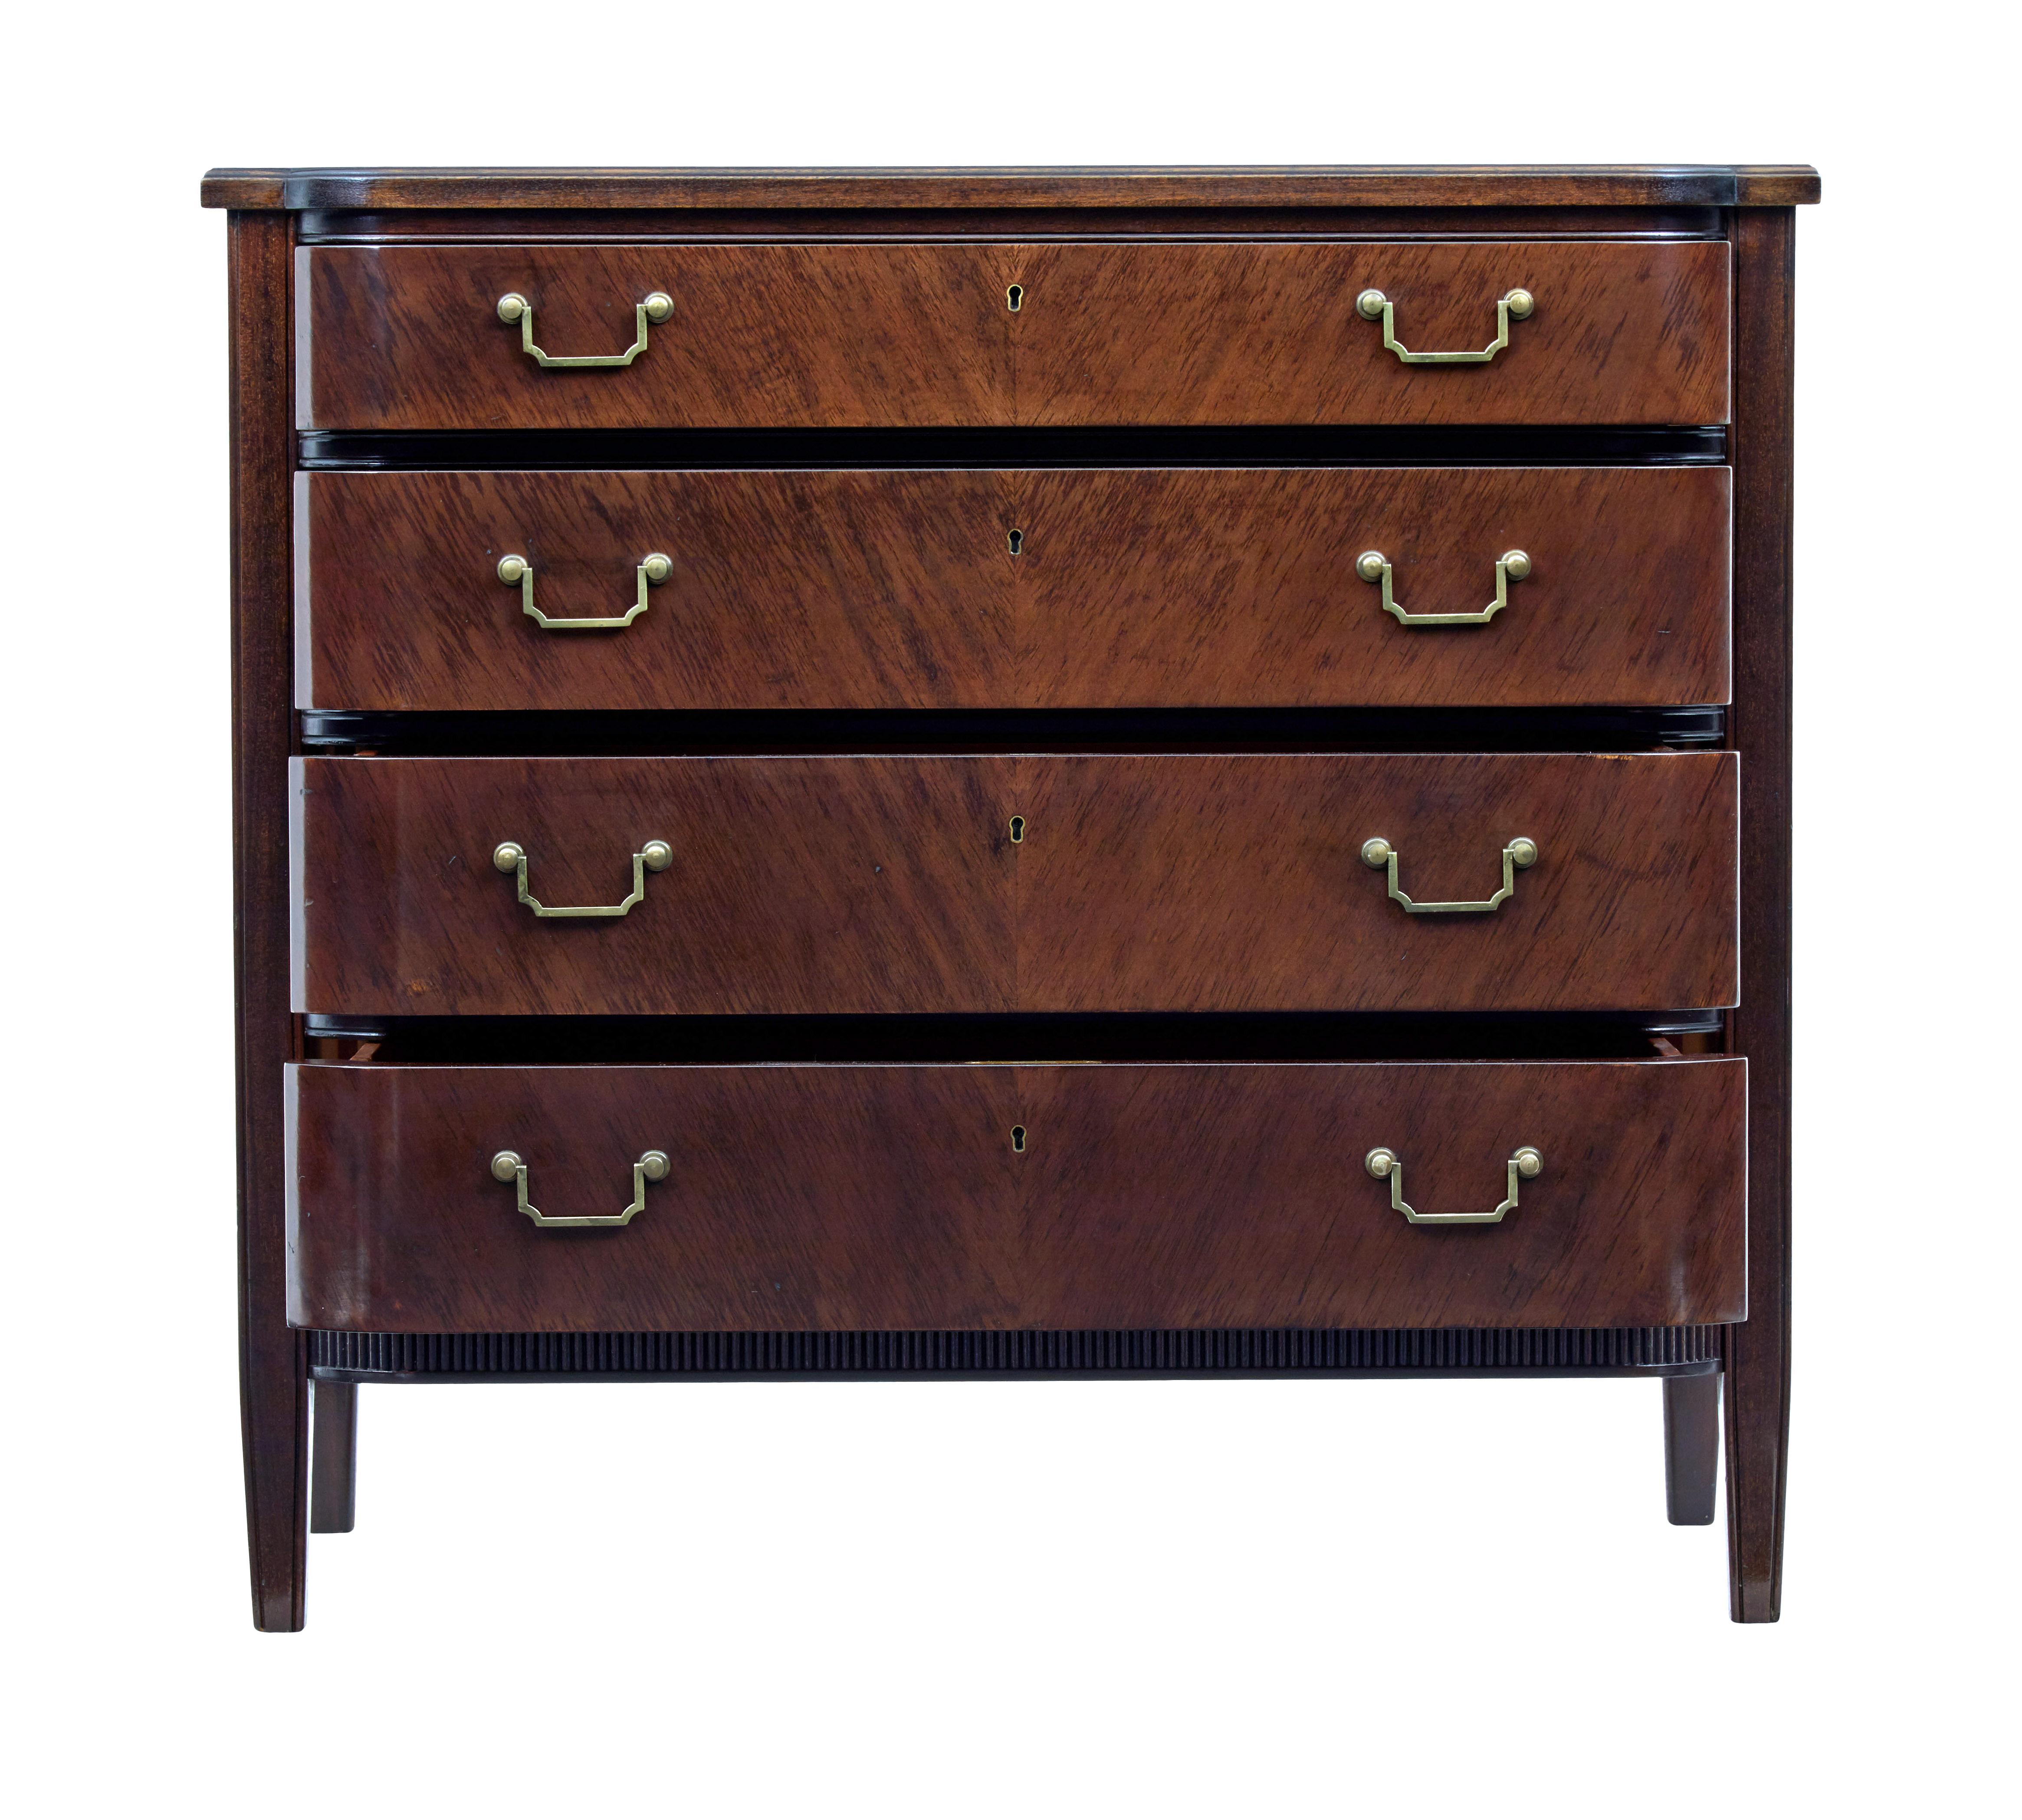 Fine quality Scandinavian mahogany chest of drawers, circa 1950.

Good quality piece of furniture fitted with 4 graduating drawers. All fitted with shaped brass handles.

Fluted detail along the bottom edge contrasting with the smoothness of the